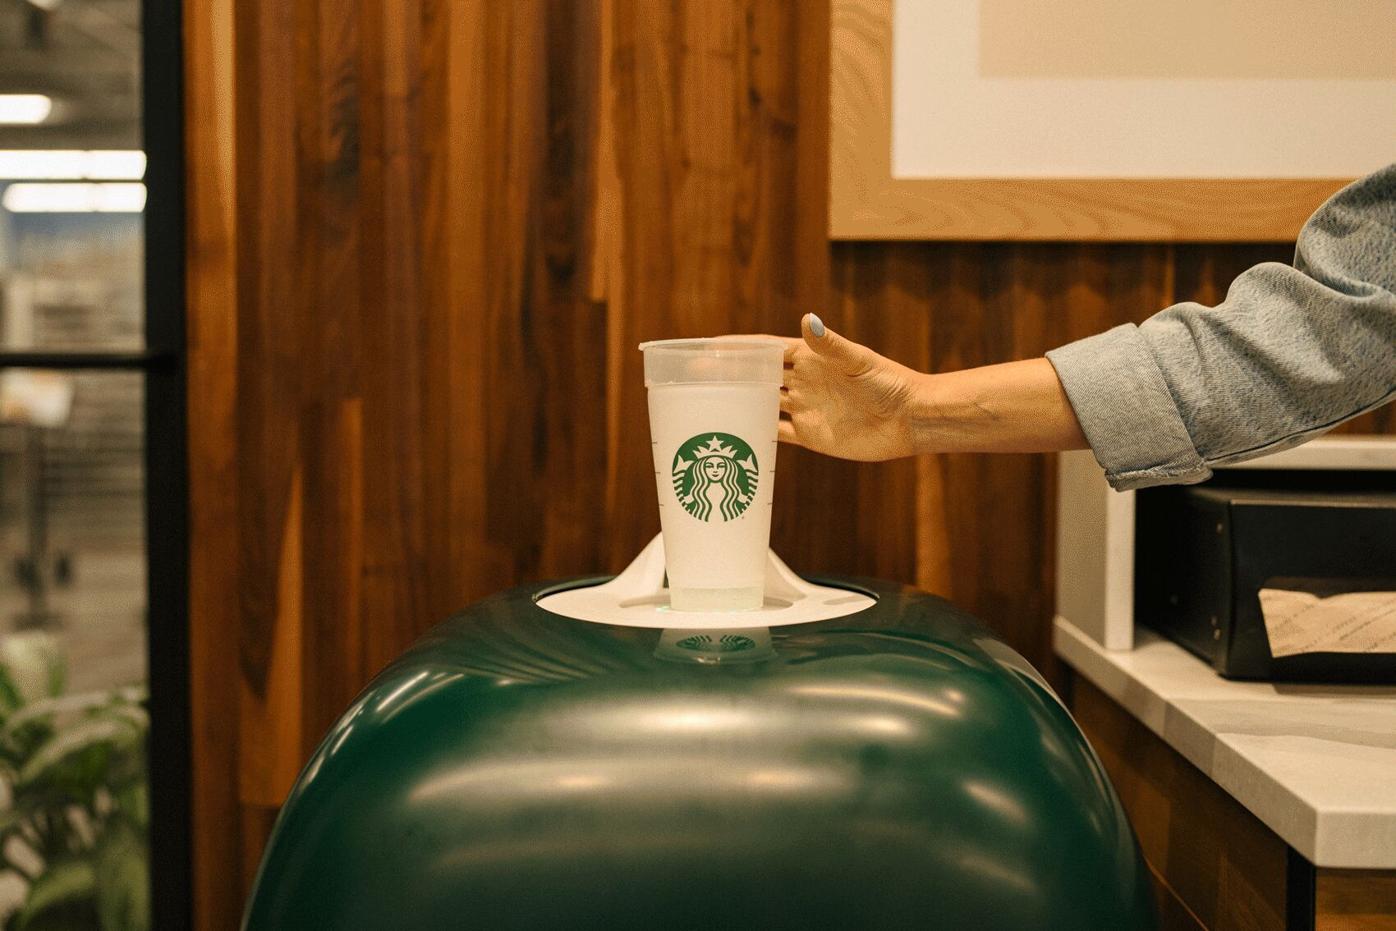 Citing sustainability, Starbucks wants to overhaul its iconic cup